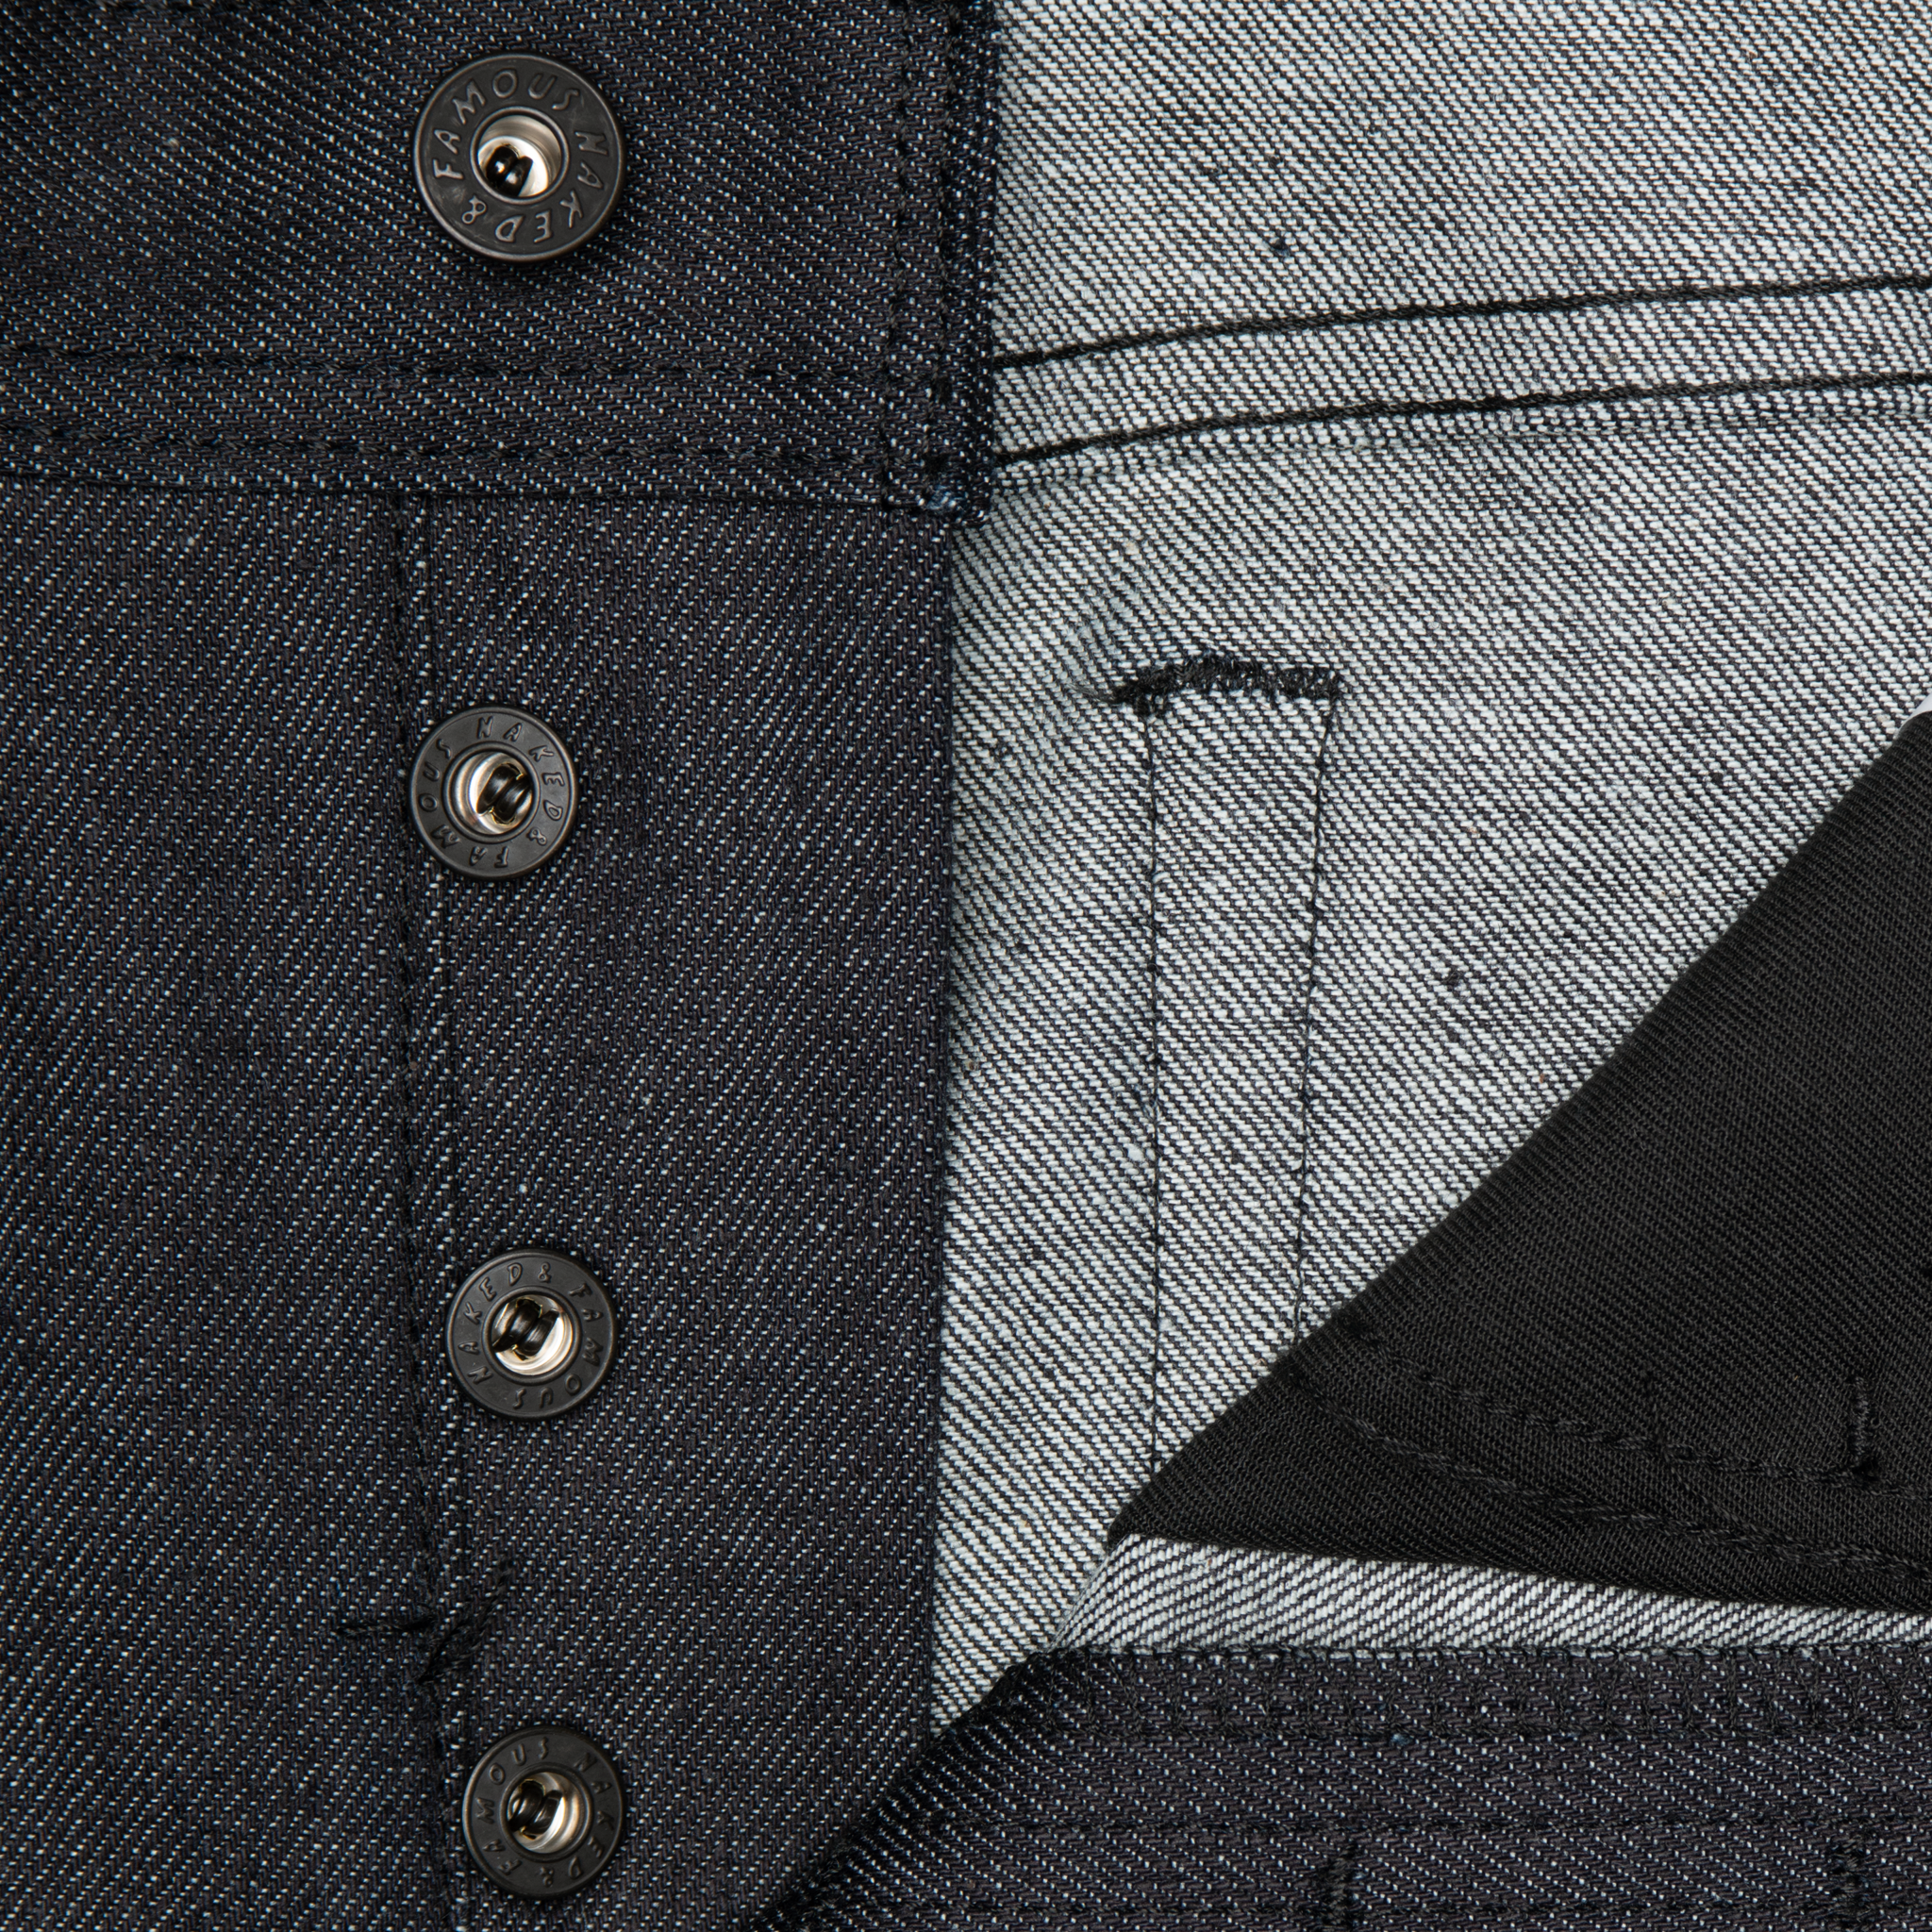  Blue Smoke Stretch Selvedge Jeans - button fly   